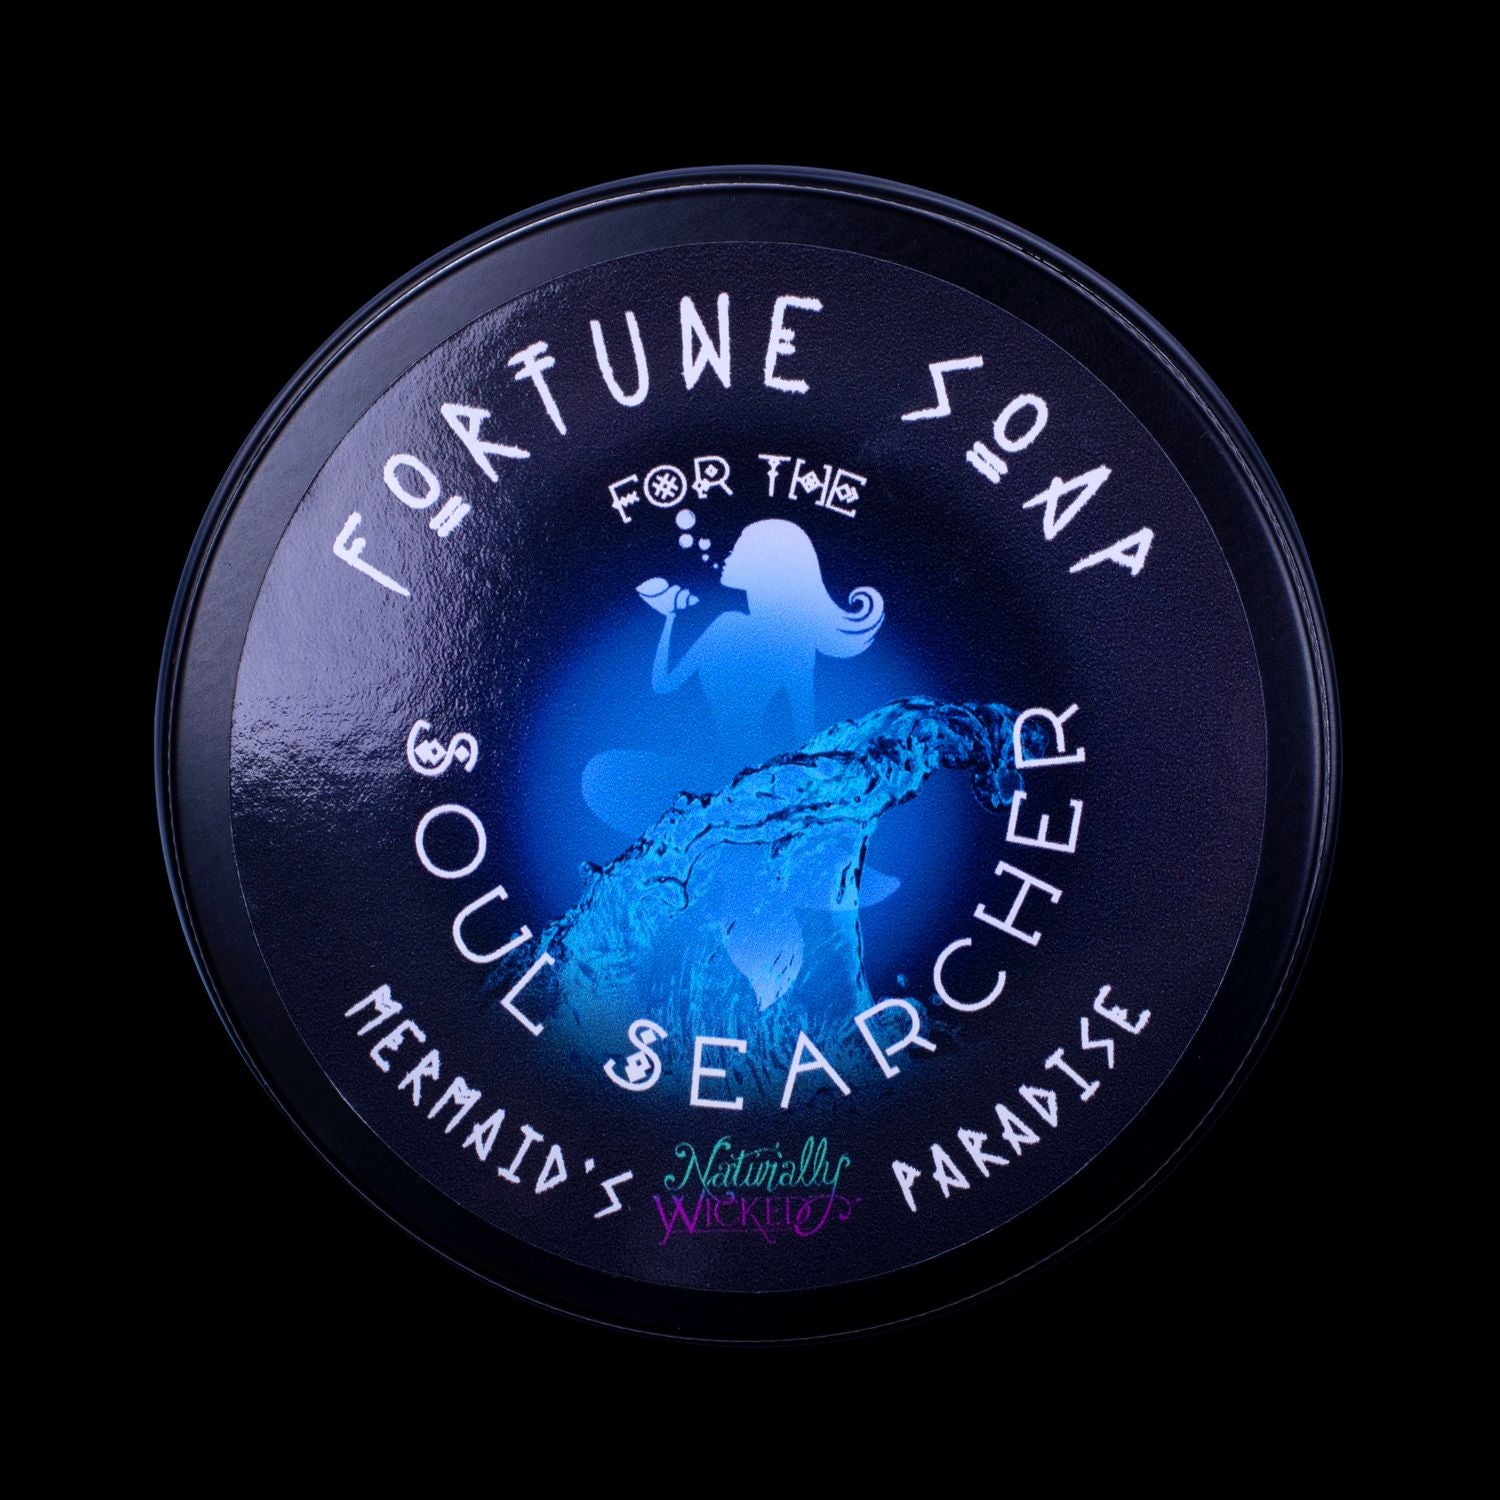 Naturally Wicked Fortune Soap For The Soul Searcher. Blue Plant-based Soap With Lapis Lazuli Rune Crystal, Scented With Mermaid's Paradise All Situated In A Black Glossy Gift Tin.